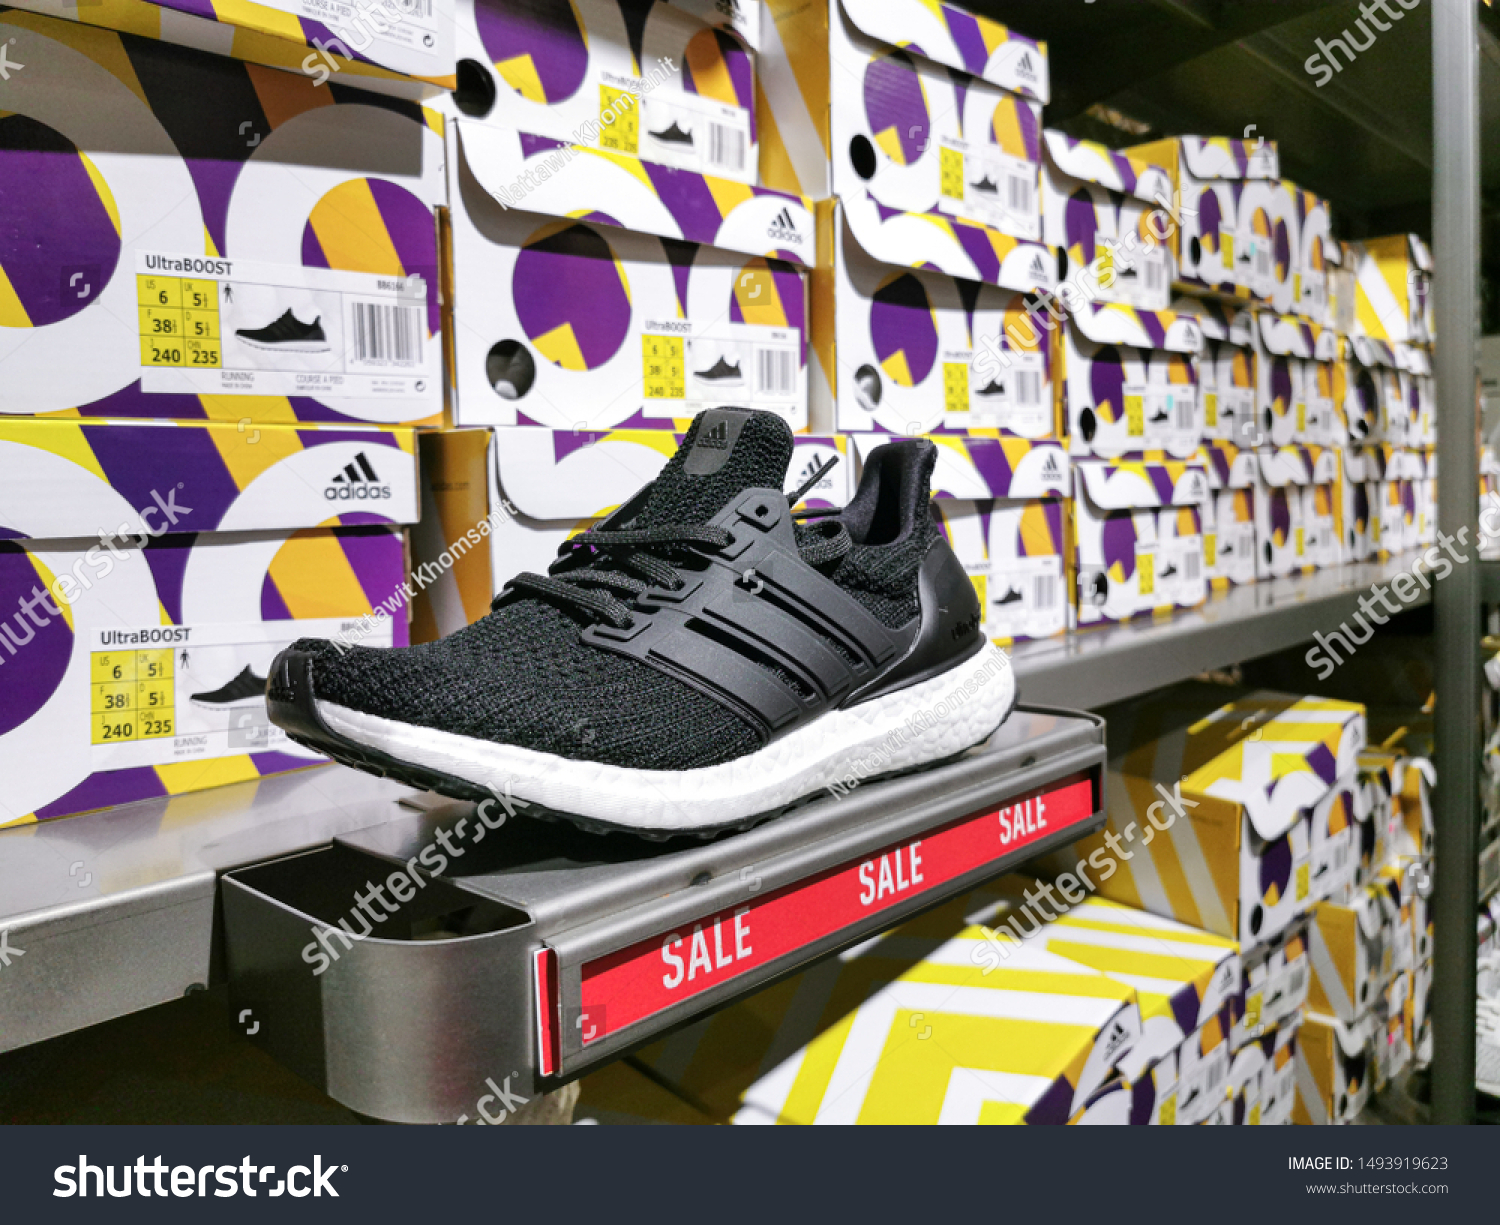 buy \u003e adidas outlet village, Up to 69% OFF